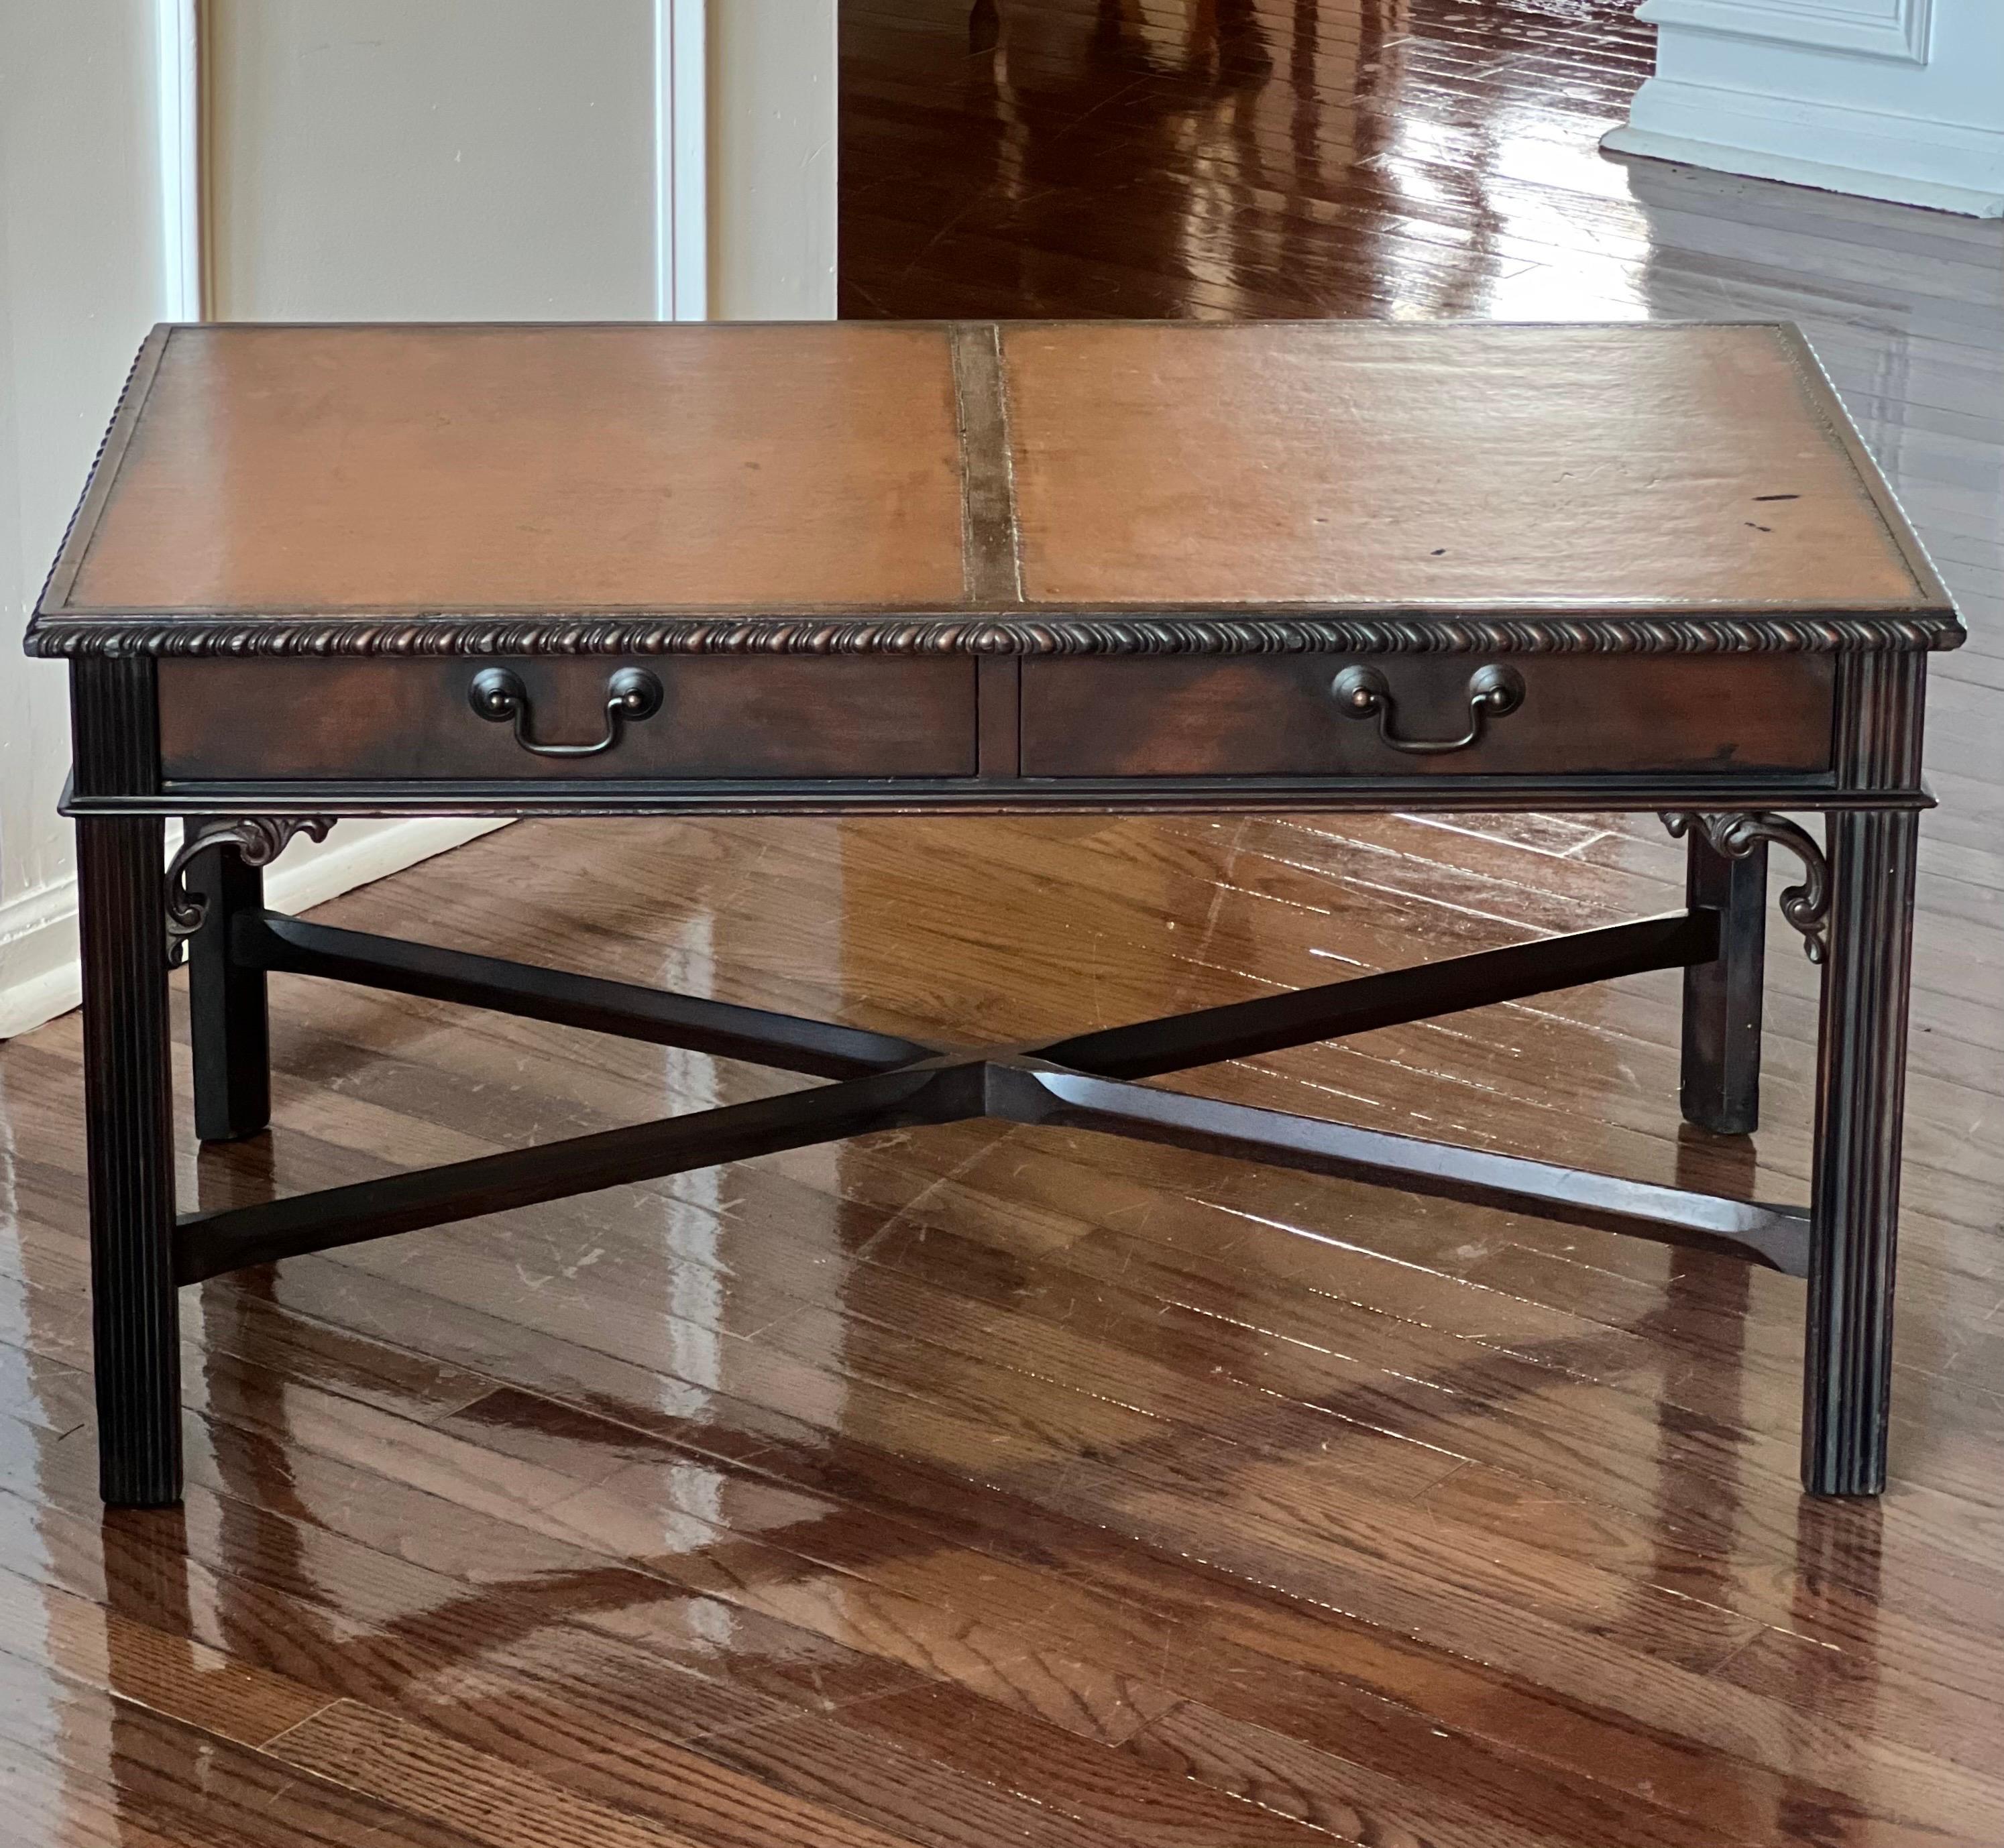 Mahogany Chippendale Style Coffee Table with Leather Top and Drawers by Imperial For Sale 9